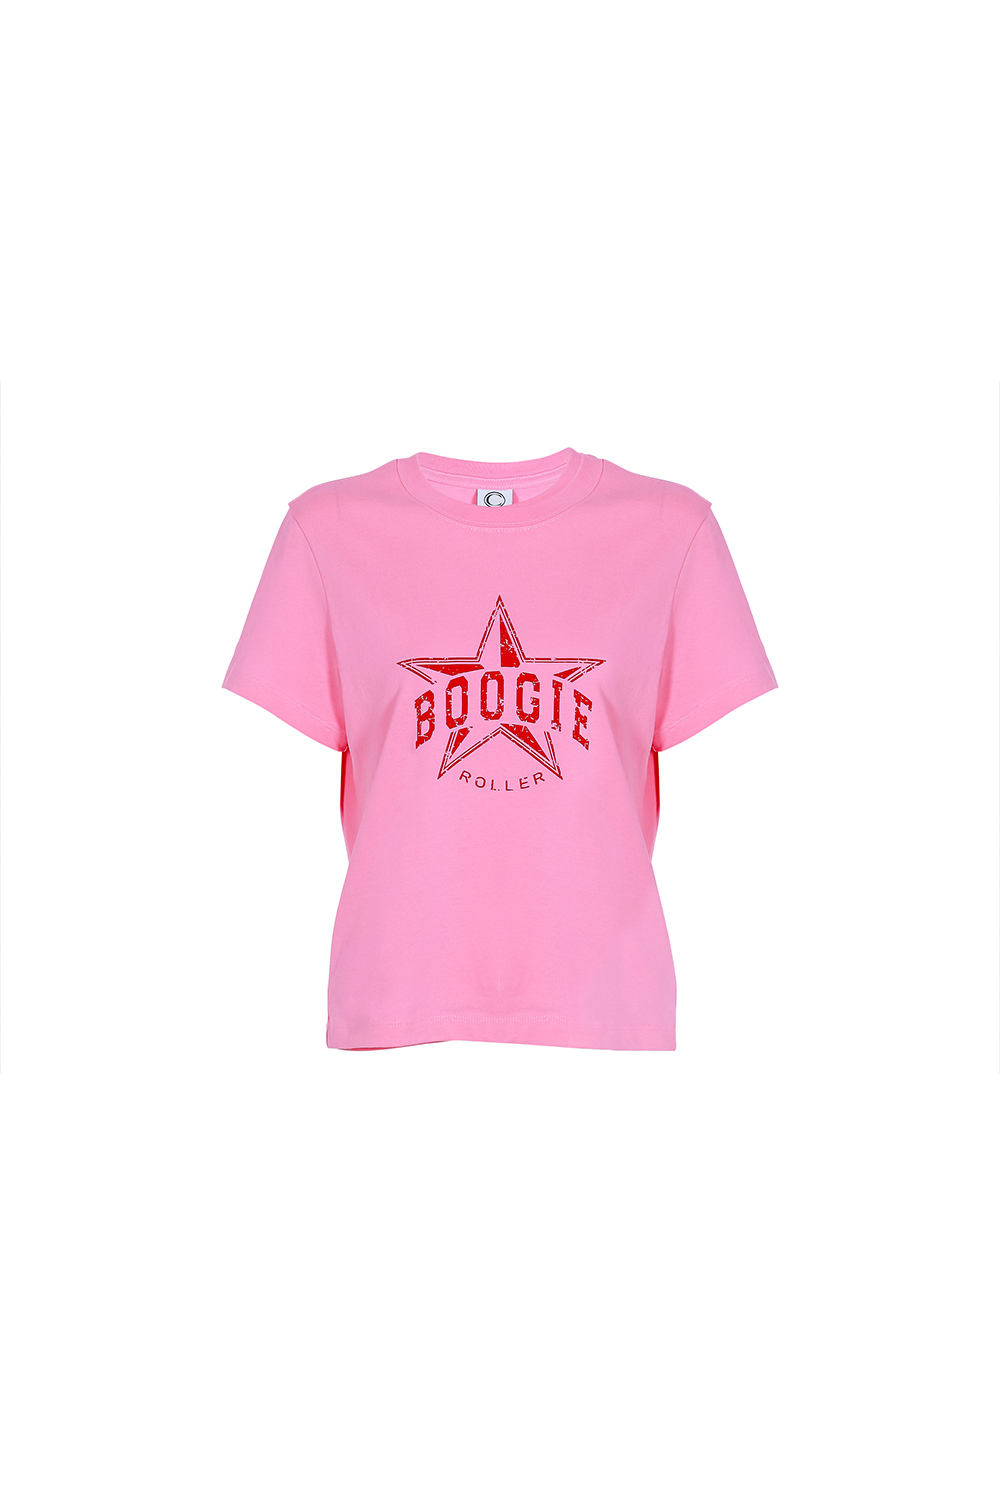 Boogie T-shirts_pink